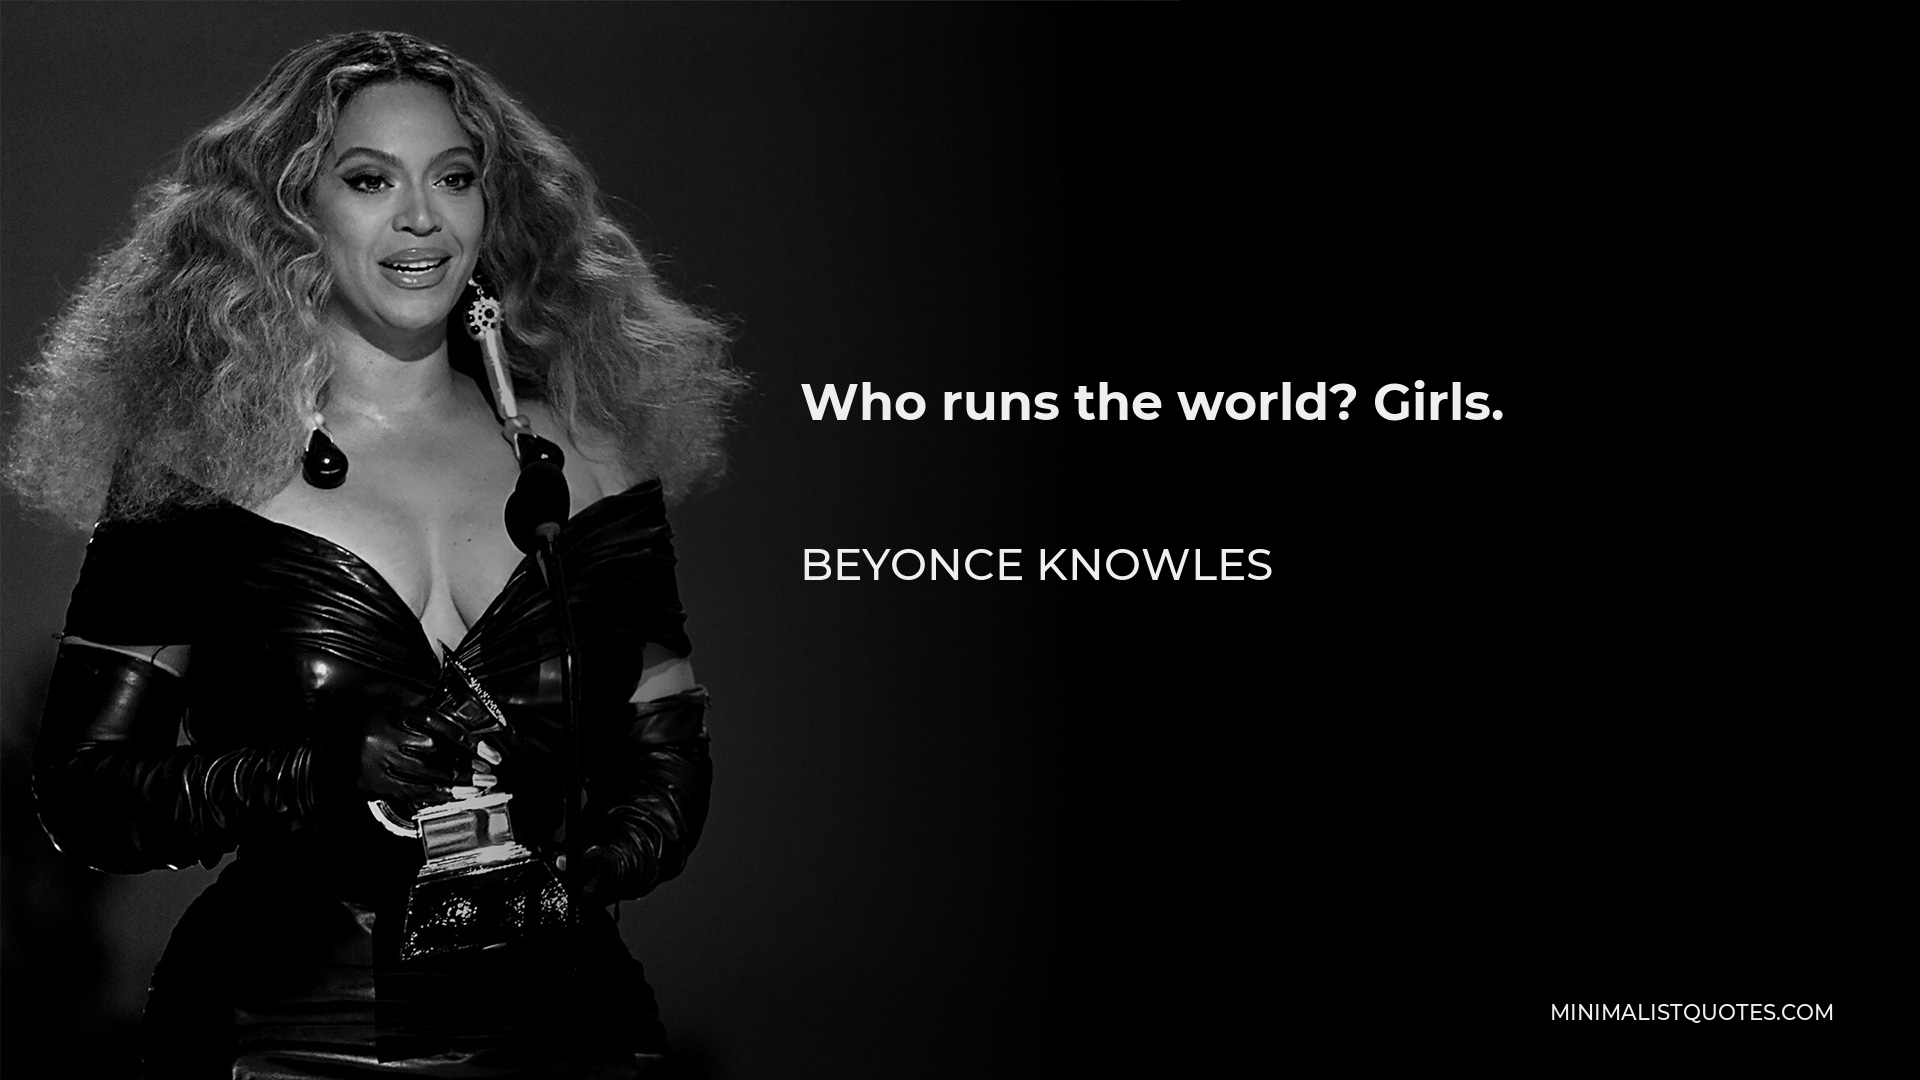 Beyonce Knowles Quote - Who runs the world? Girls.